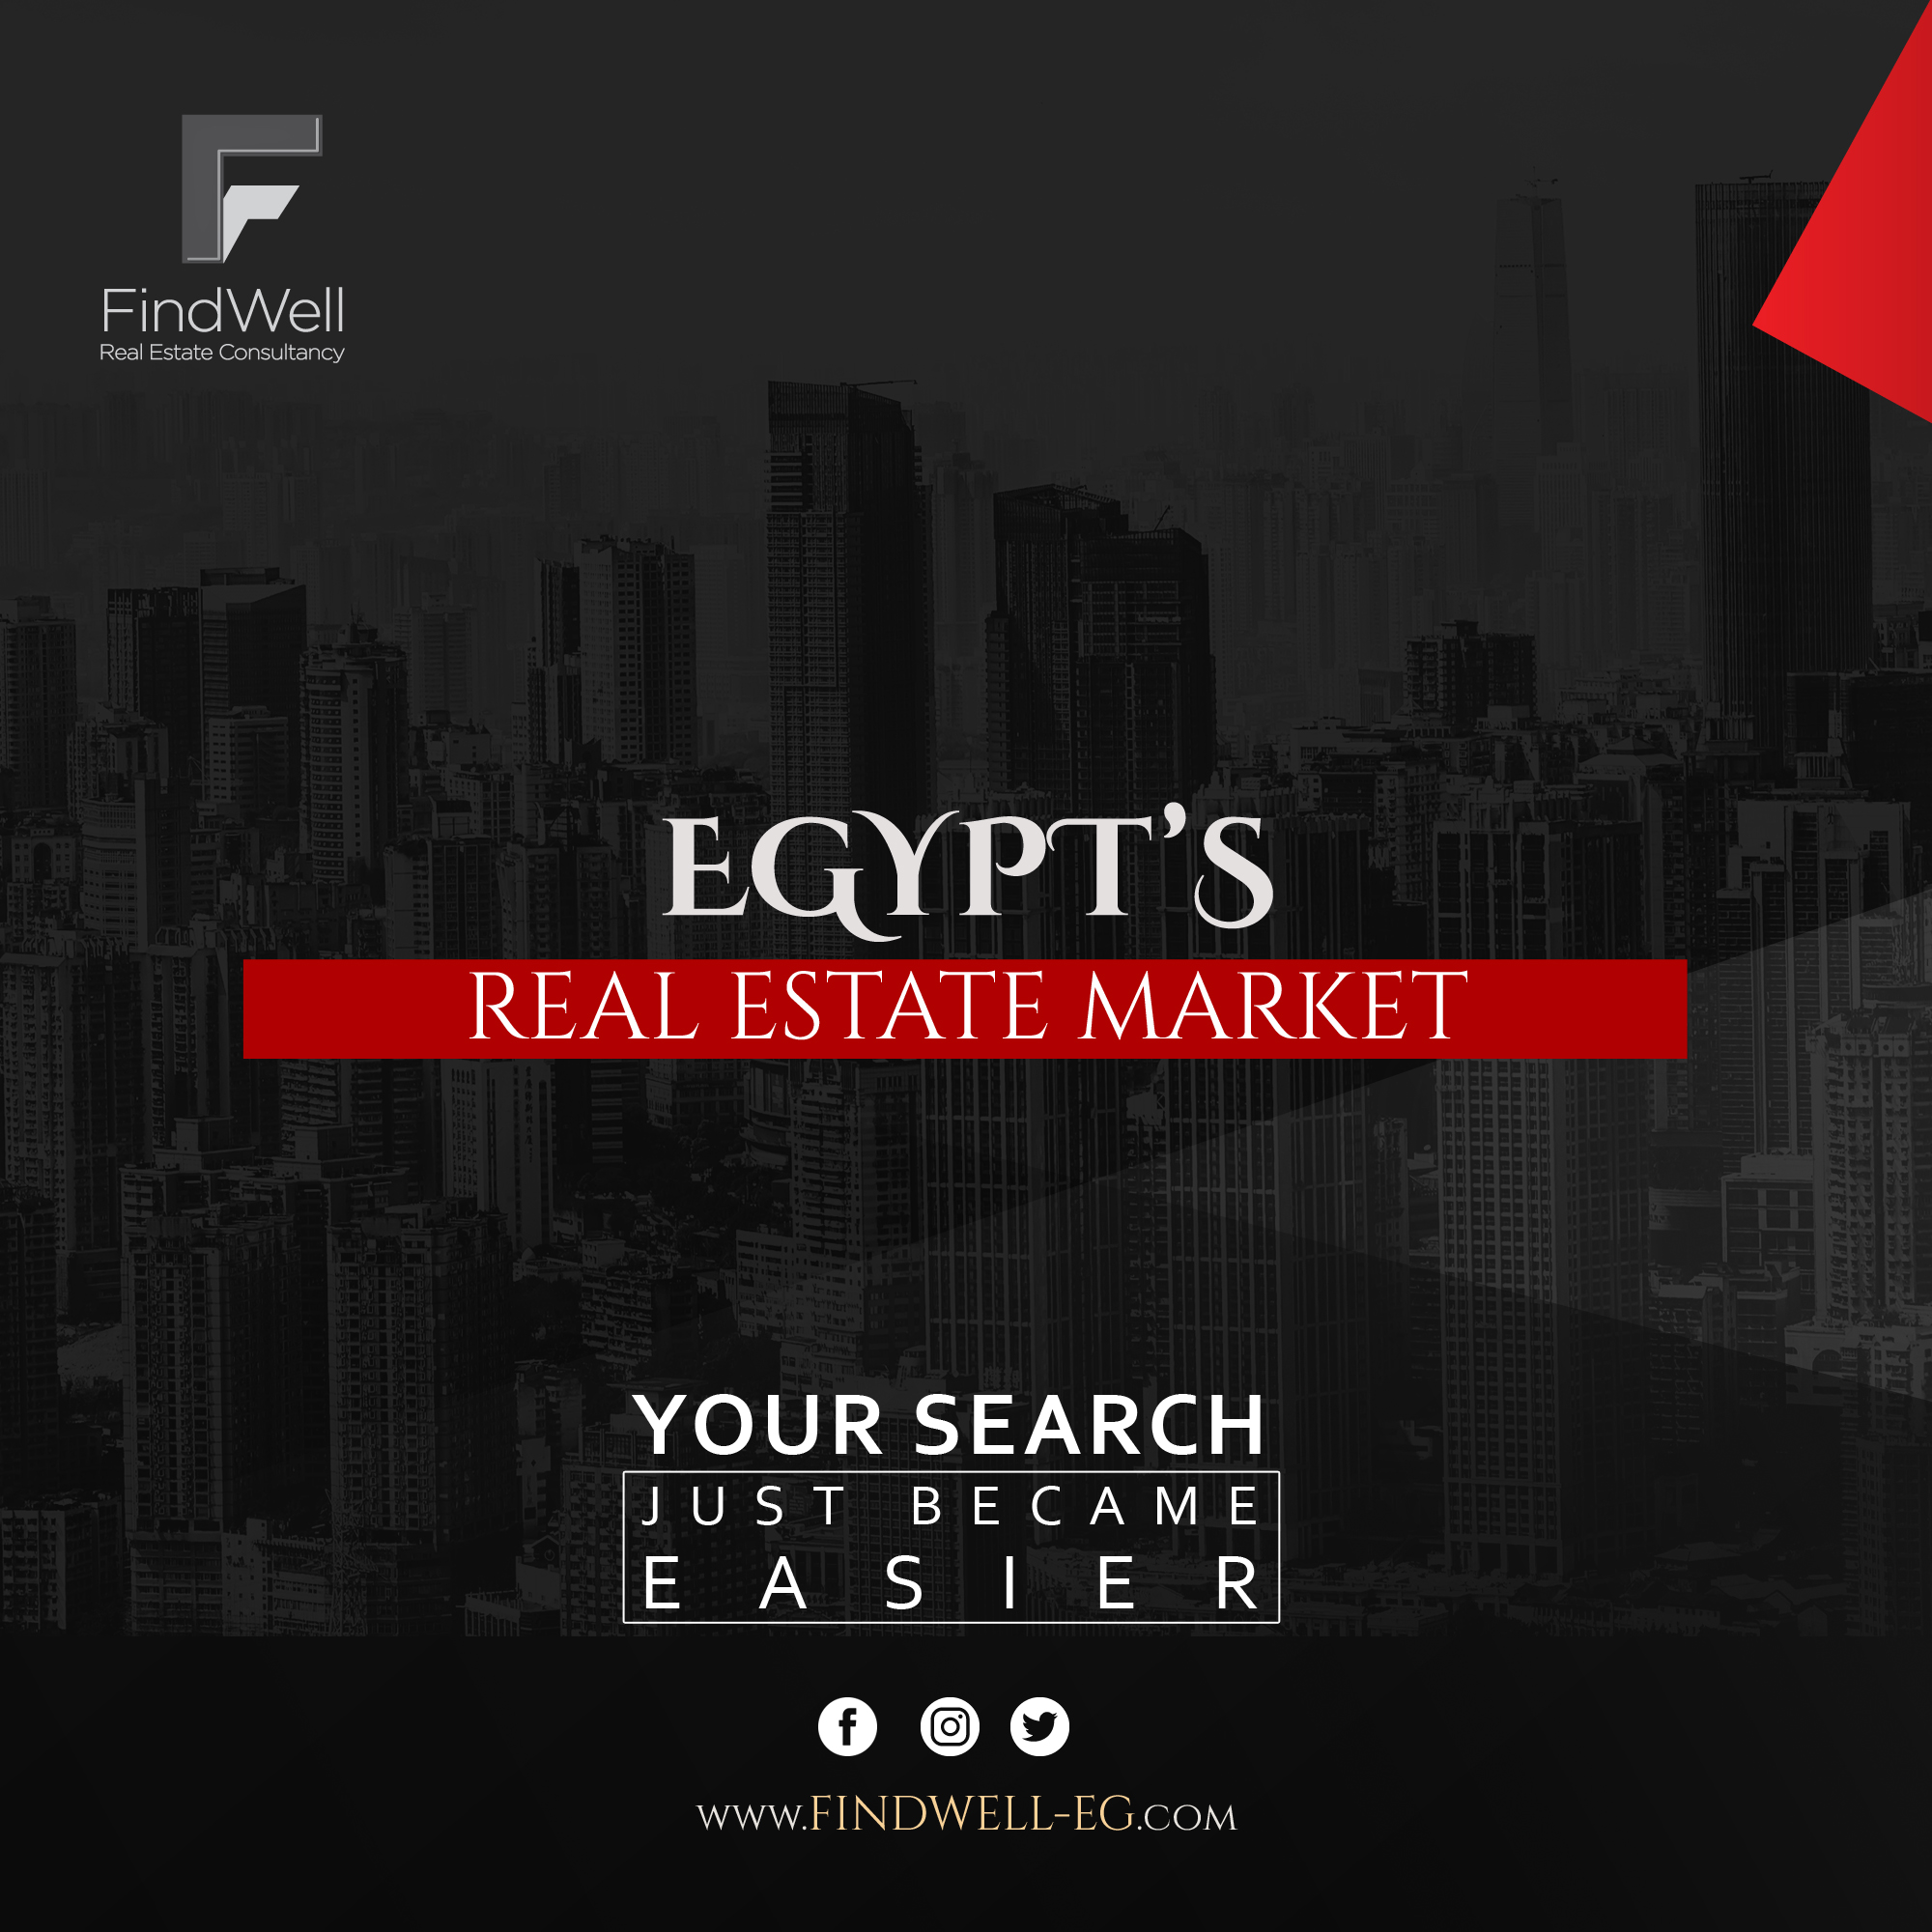 Egypt’s Real Estate market expected to rebound in Q2 2021